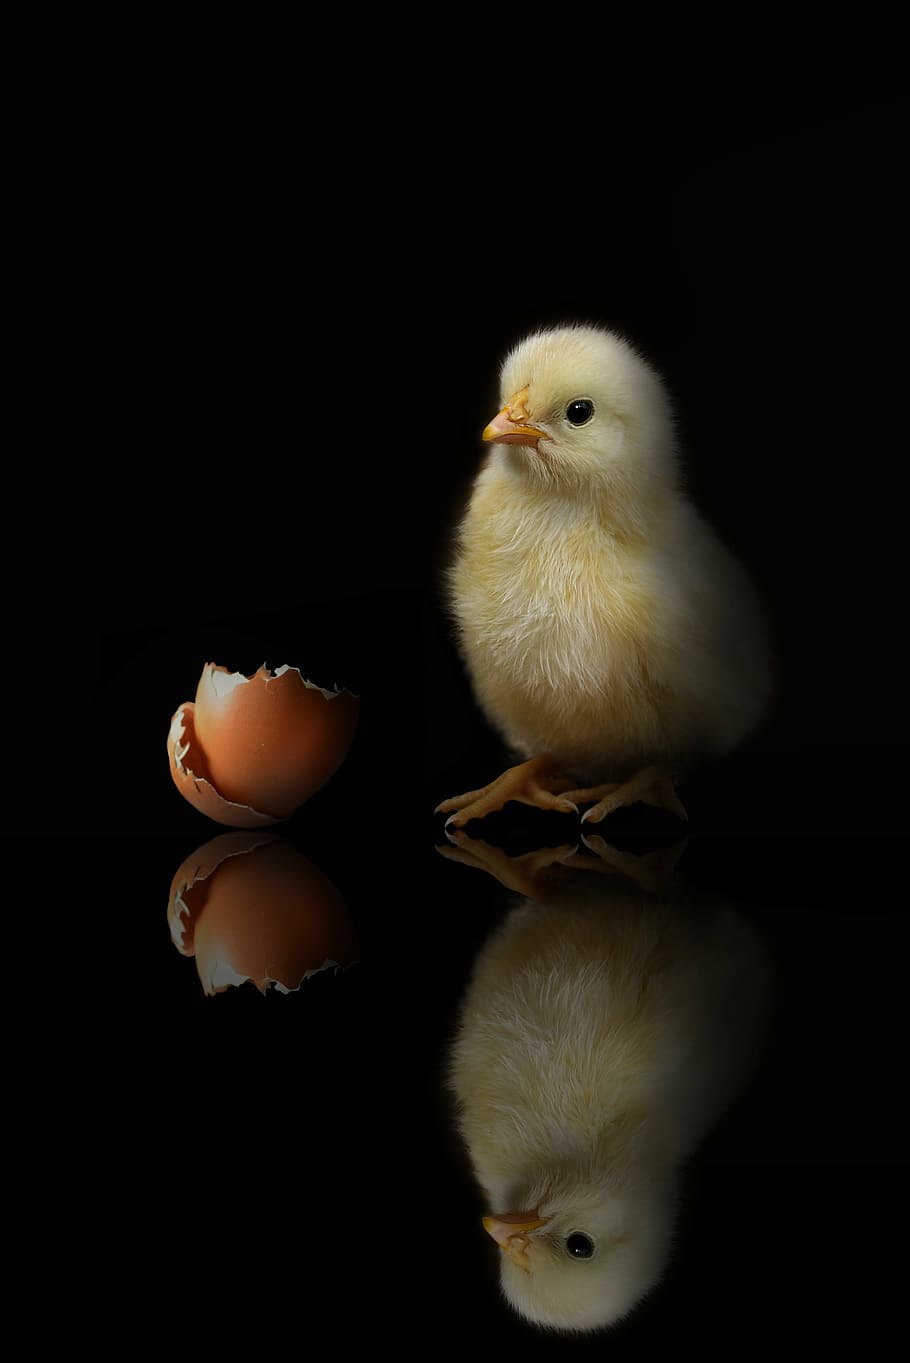 yellow chick besides brown egg shell, animal, chicken, poultry